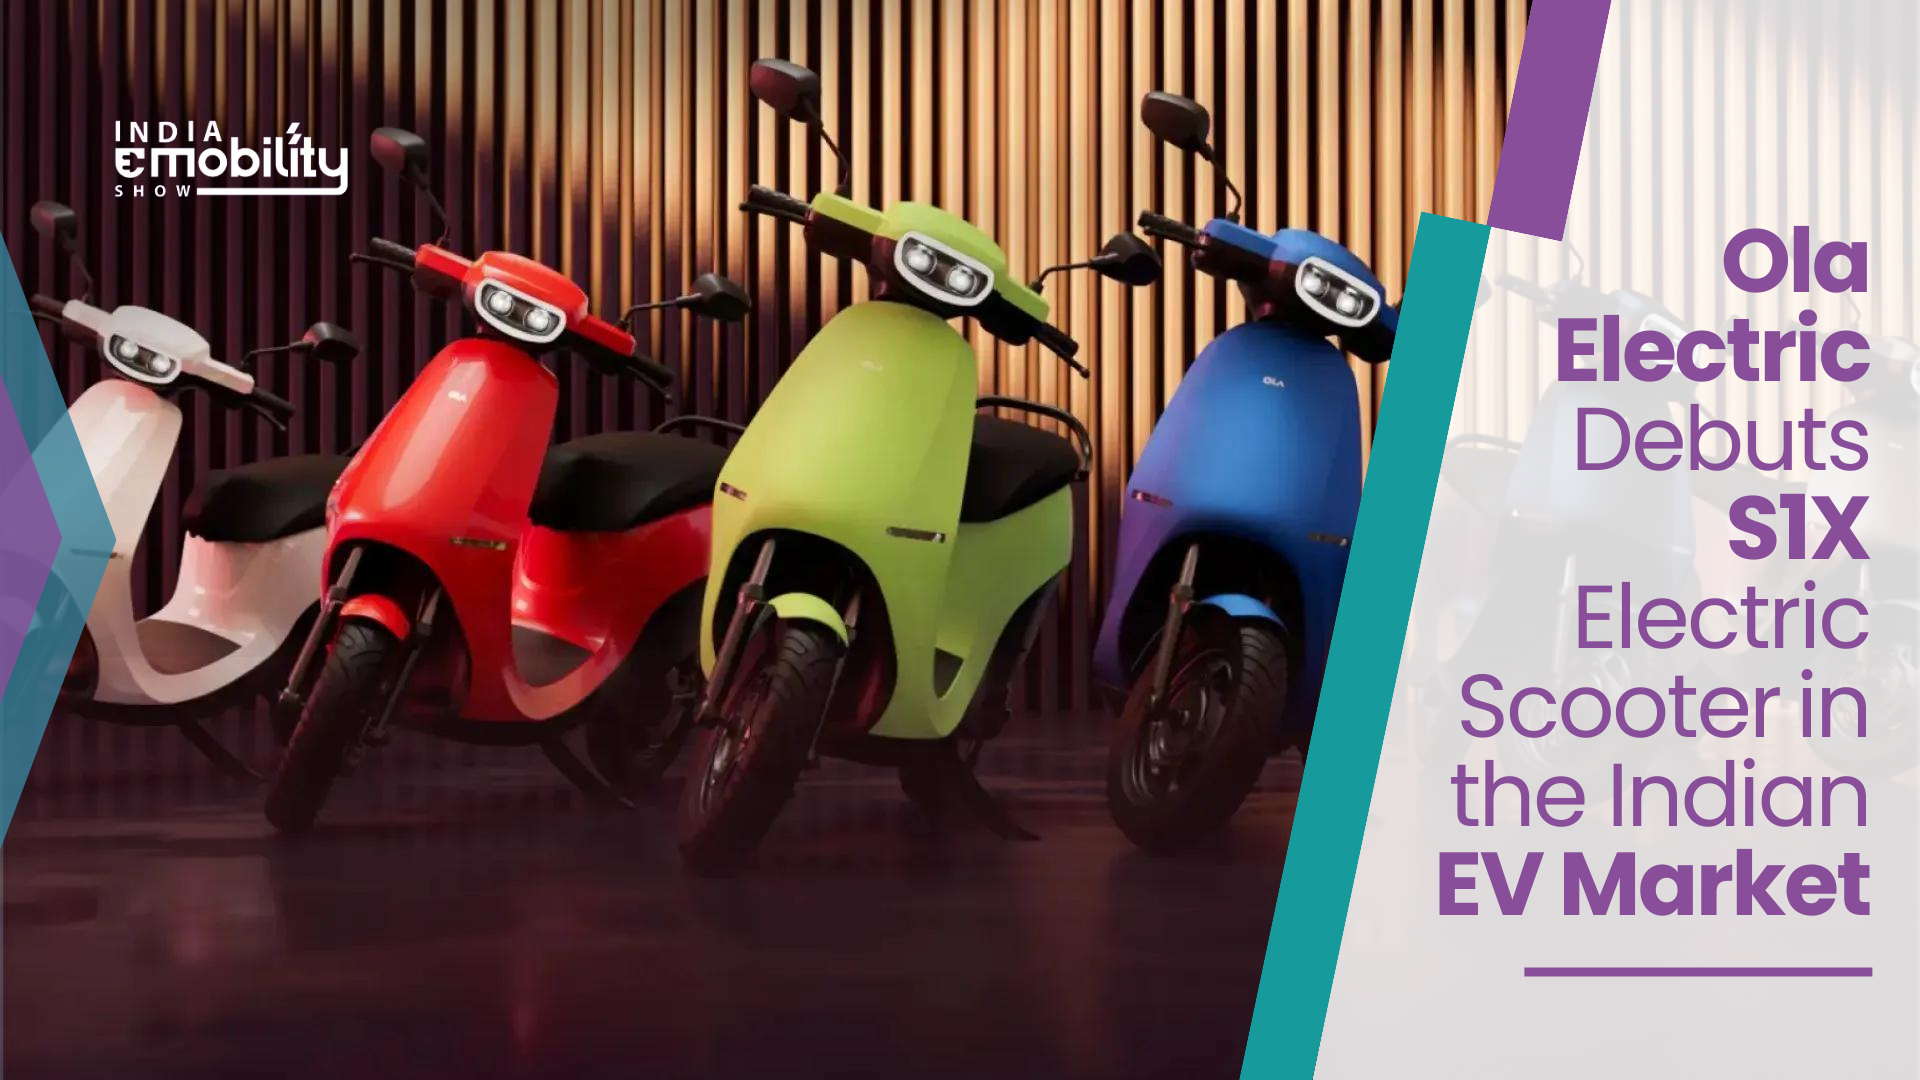 Ola Electric Debuts S1X Electric Scooter in the Indian EV Market